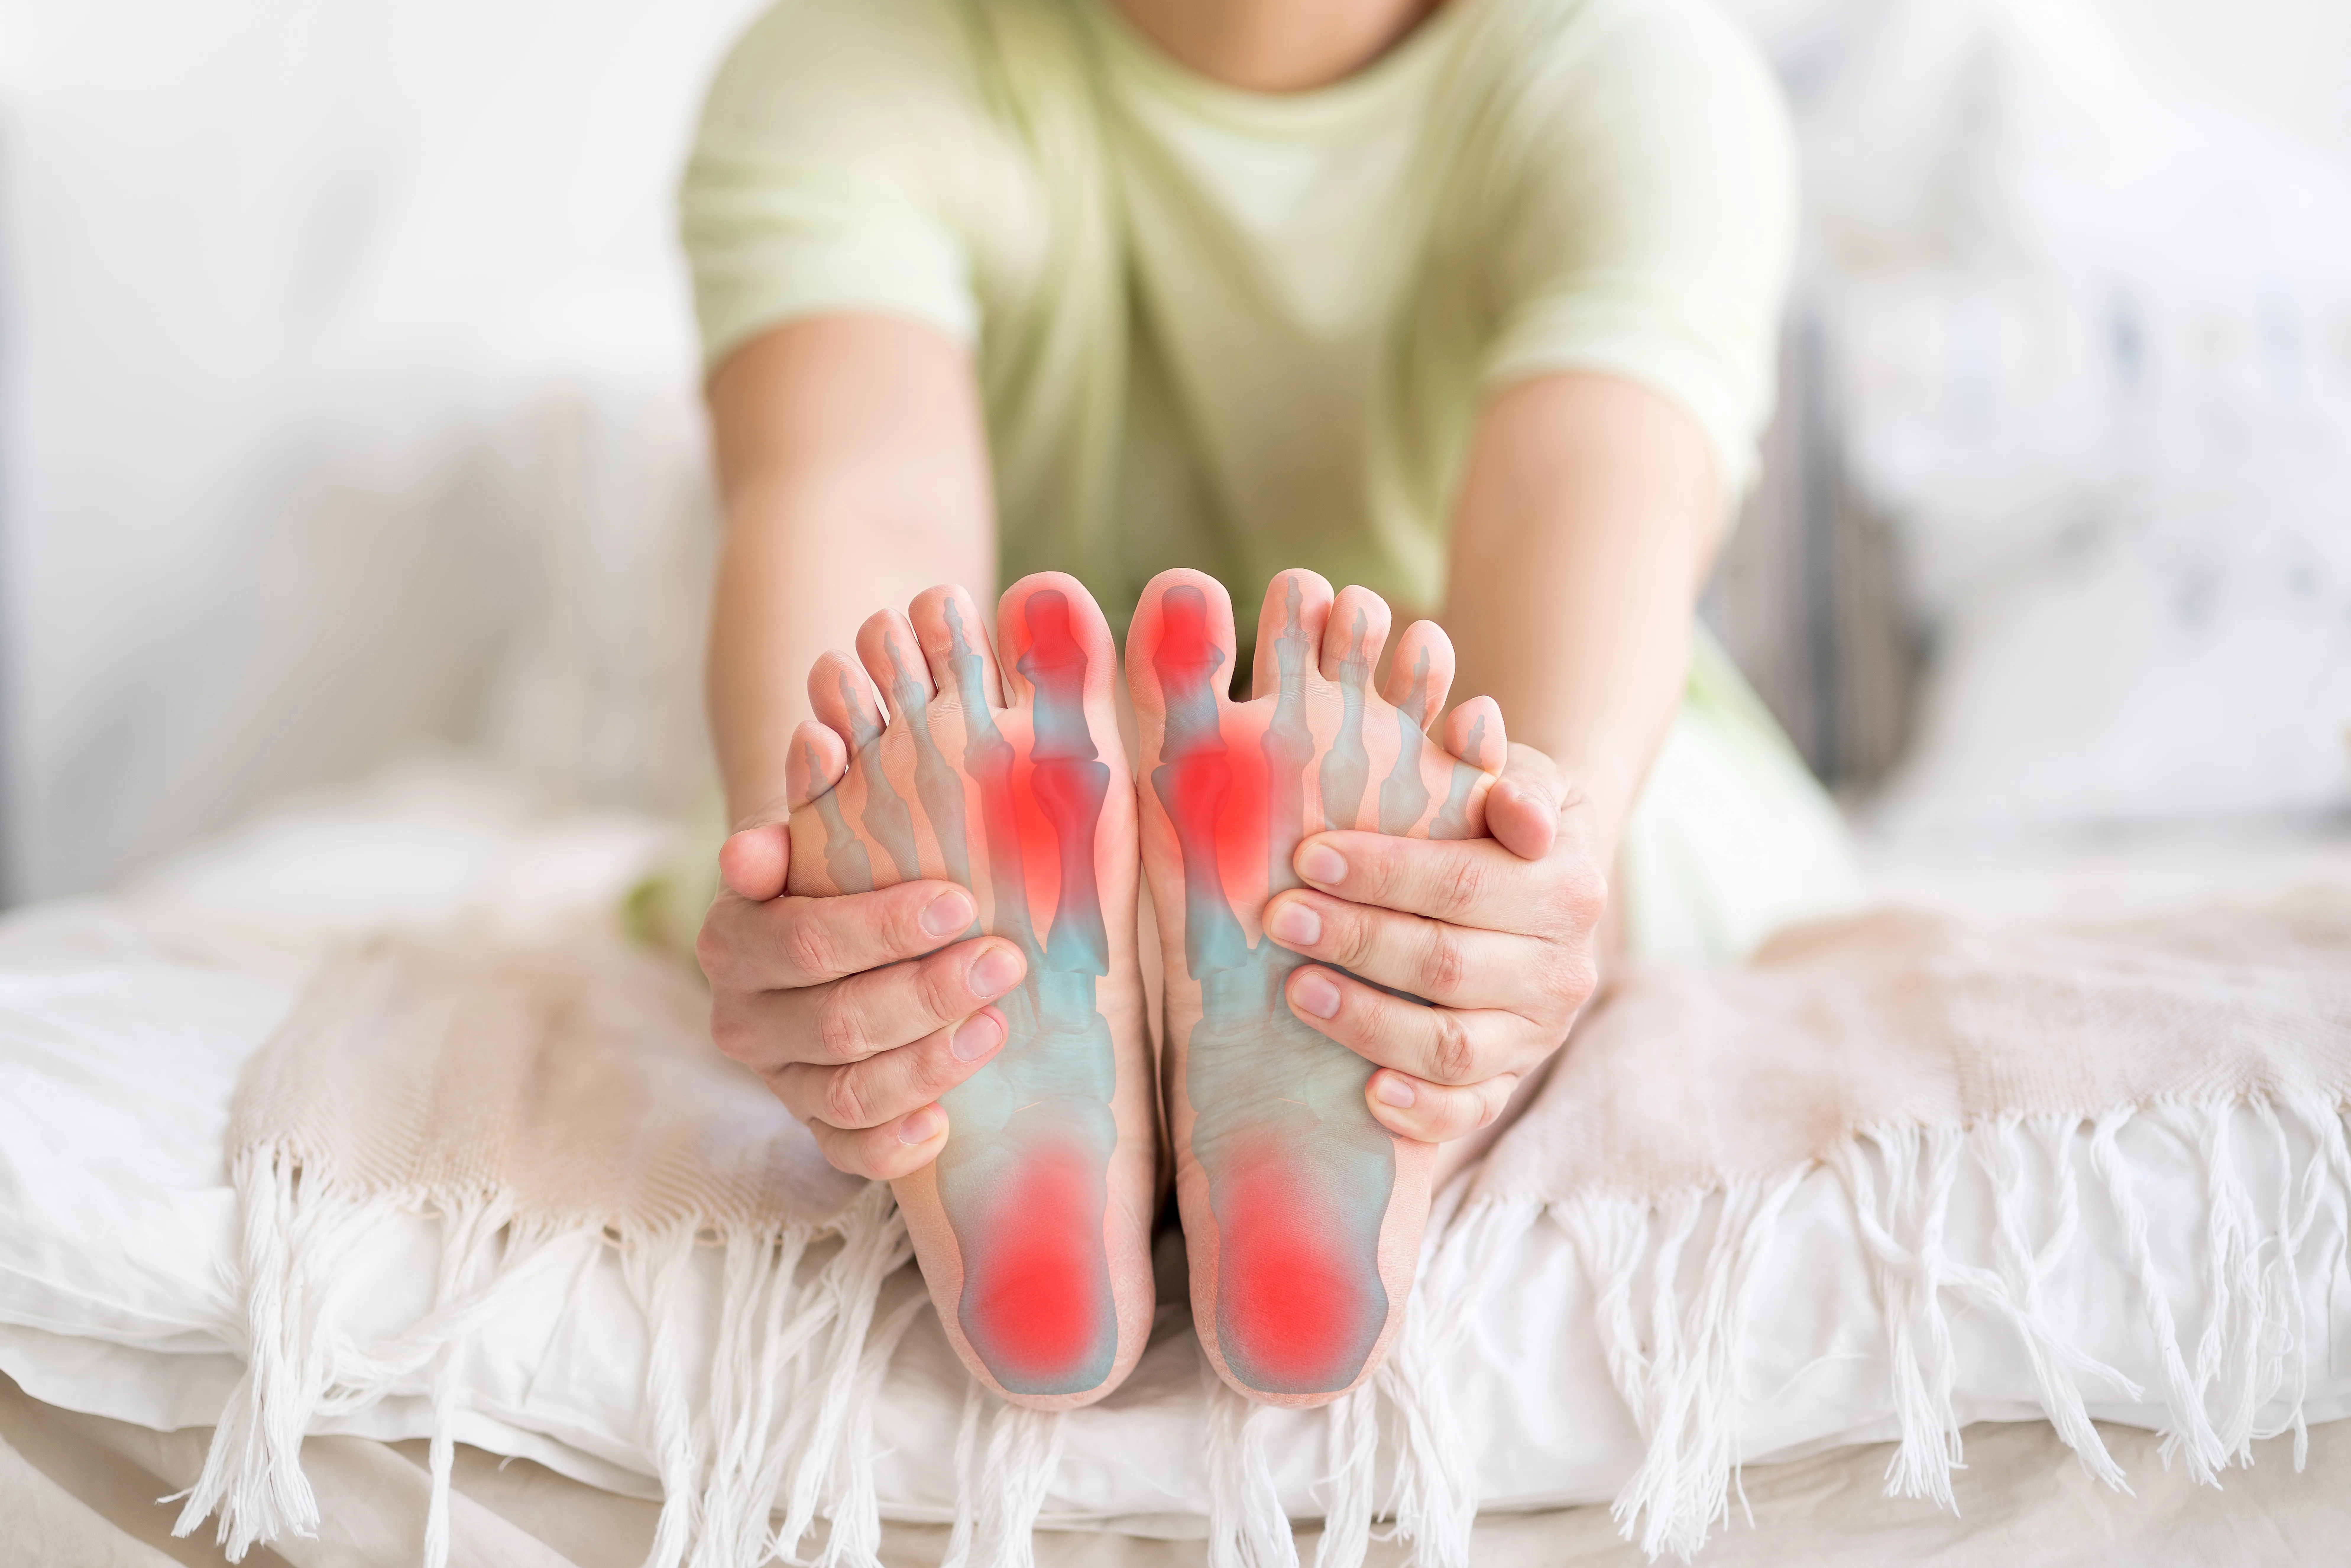 6 Ways to Alleviate Pain and Discomfort Caused by Plantar Fasciitis